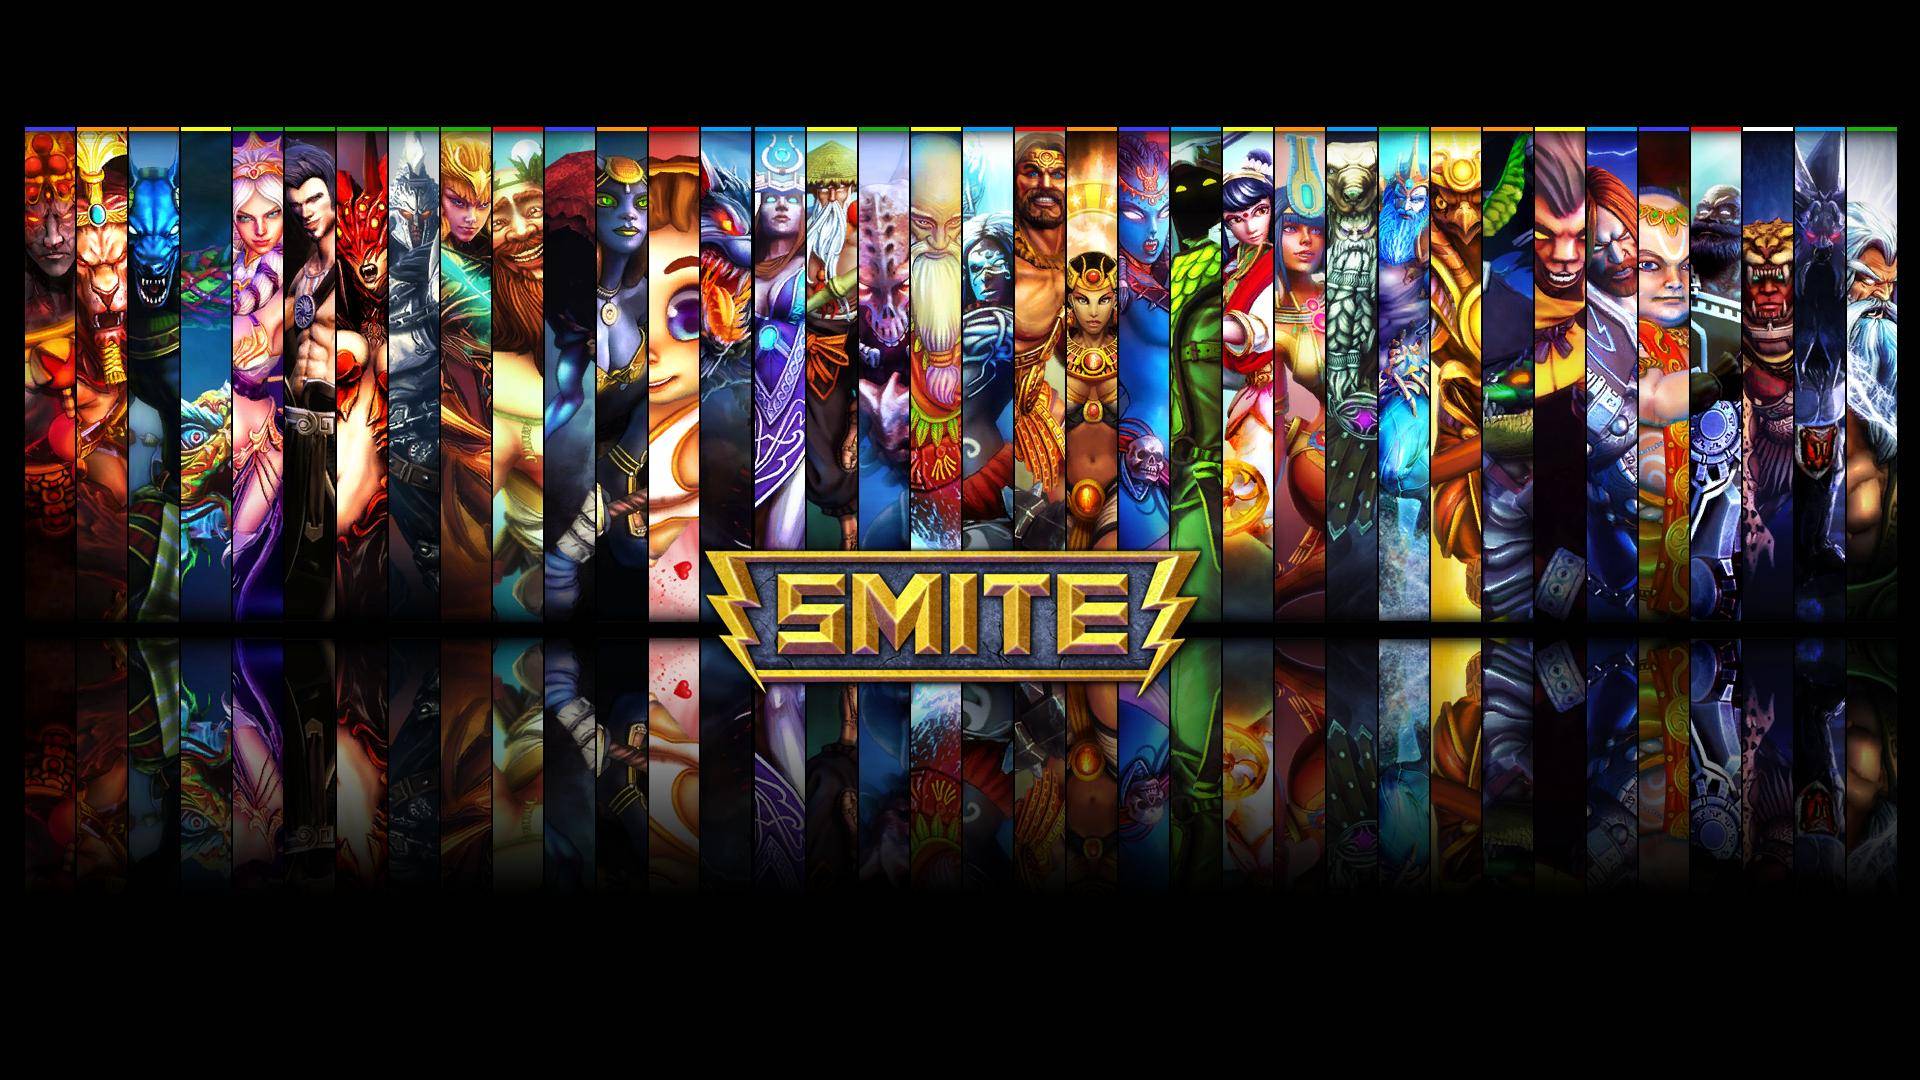 smite xbox one closed beta keys giveaway the xbox one version of smite